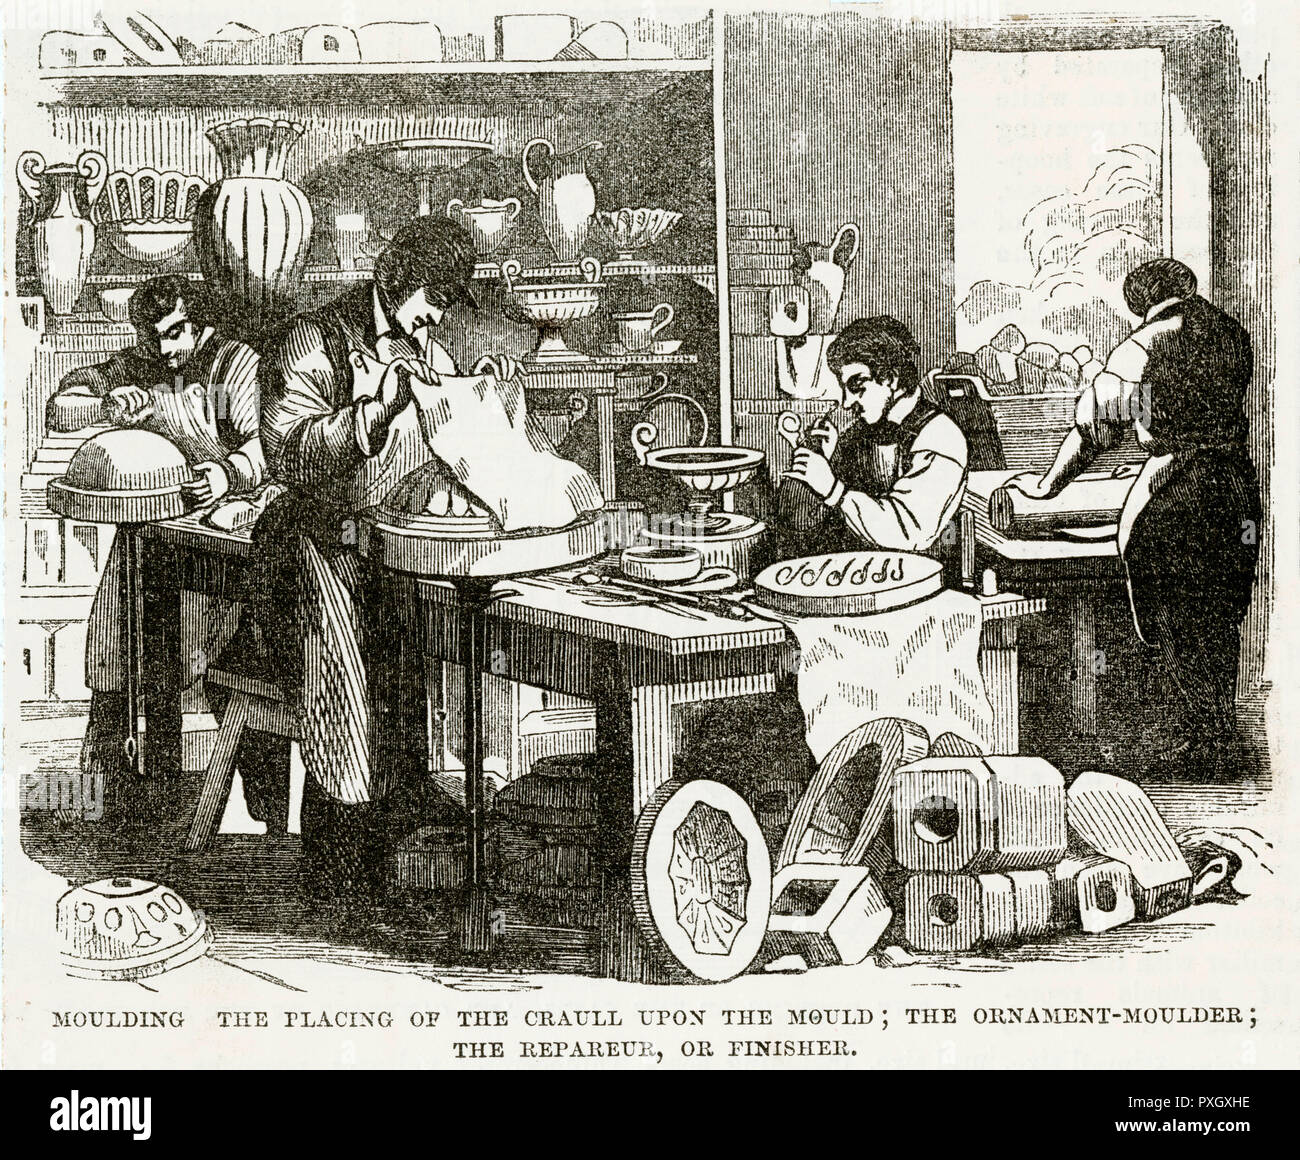 Moulding: The placing of the craull upon the mould; the ornament-moulder repareur or finisher.     Date: 1848 Stock Photo